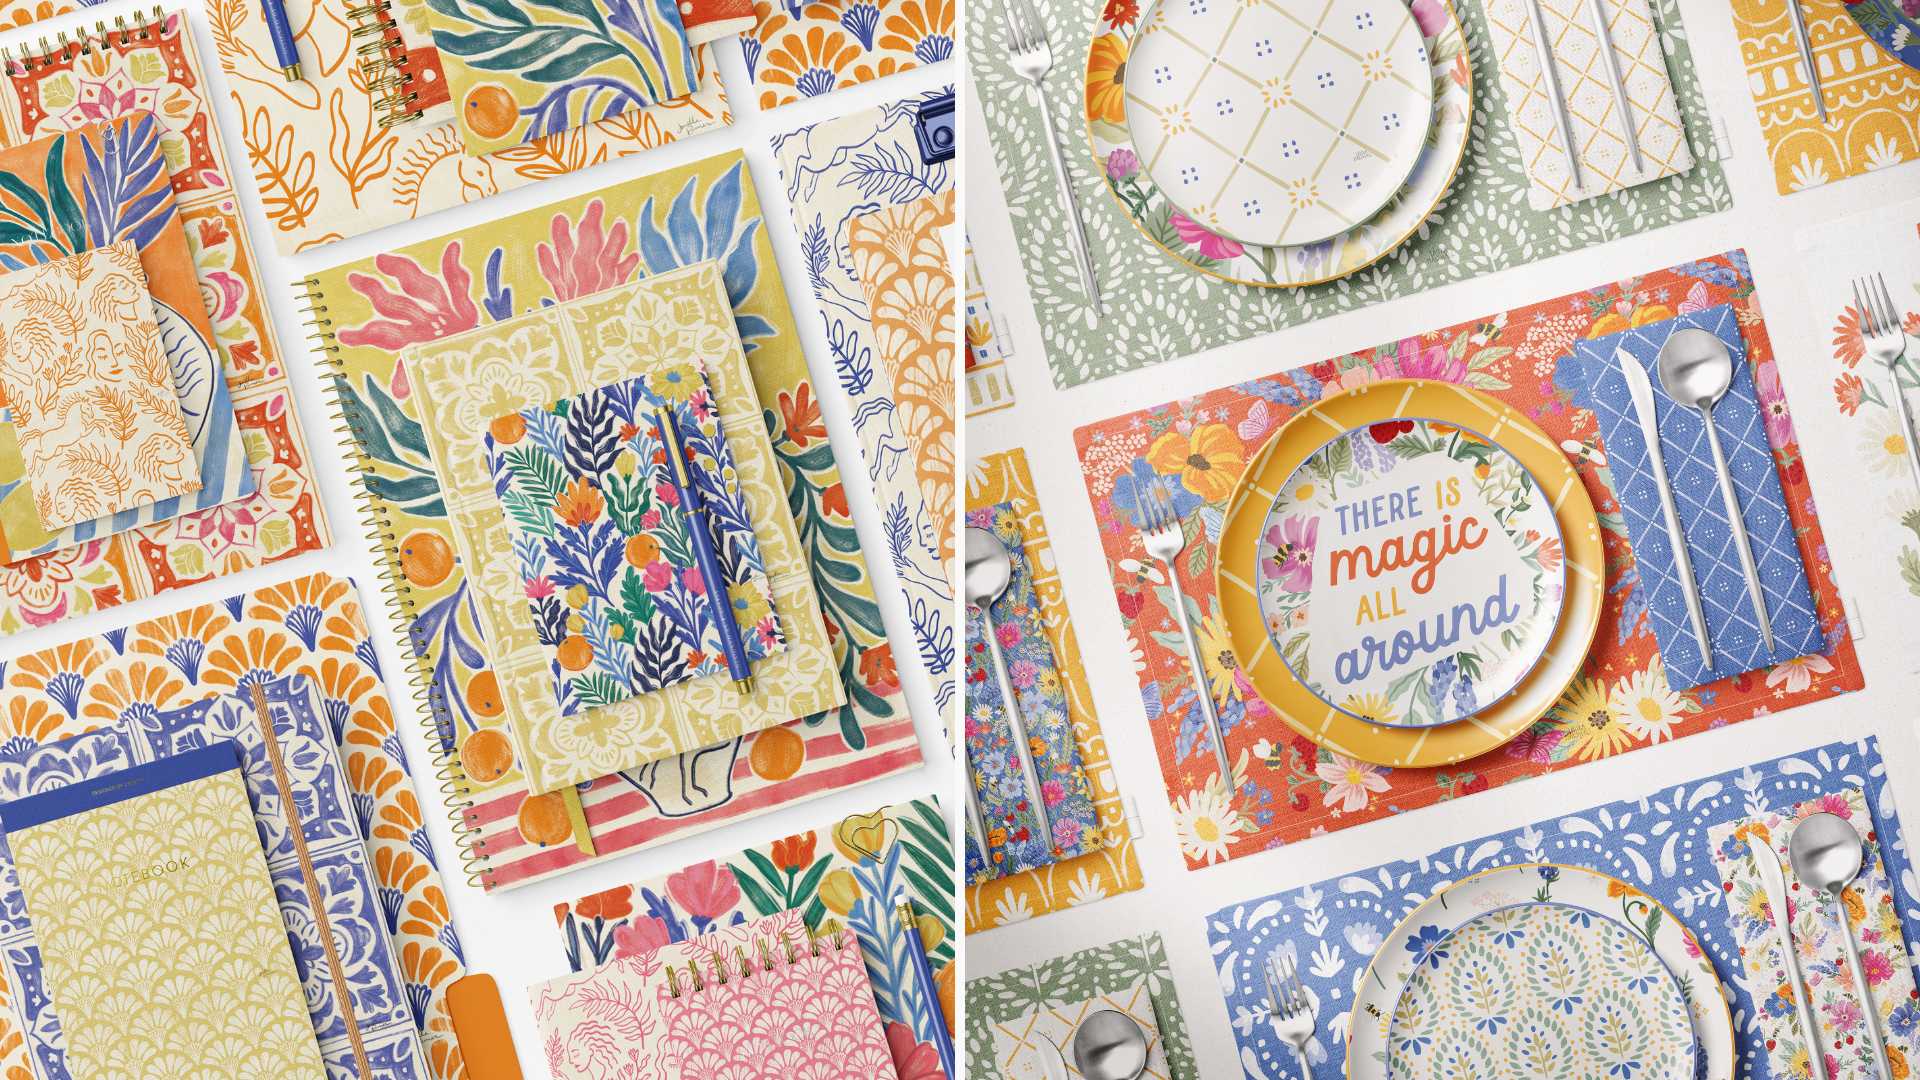 Colorful stationery and dinnerware featuring art available for licensing